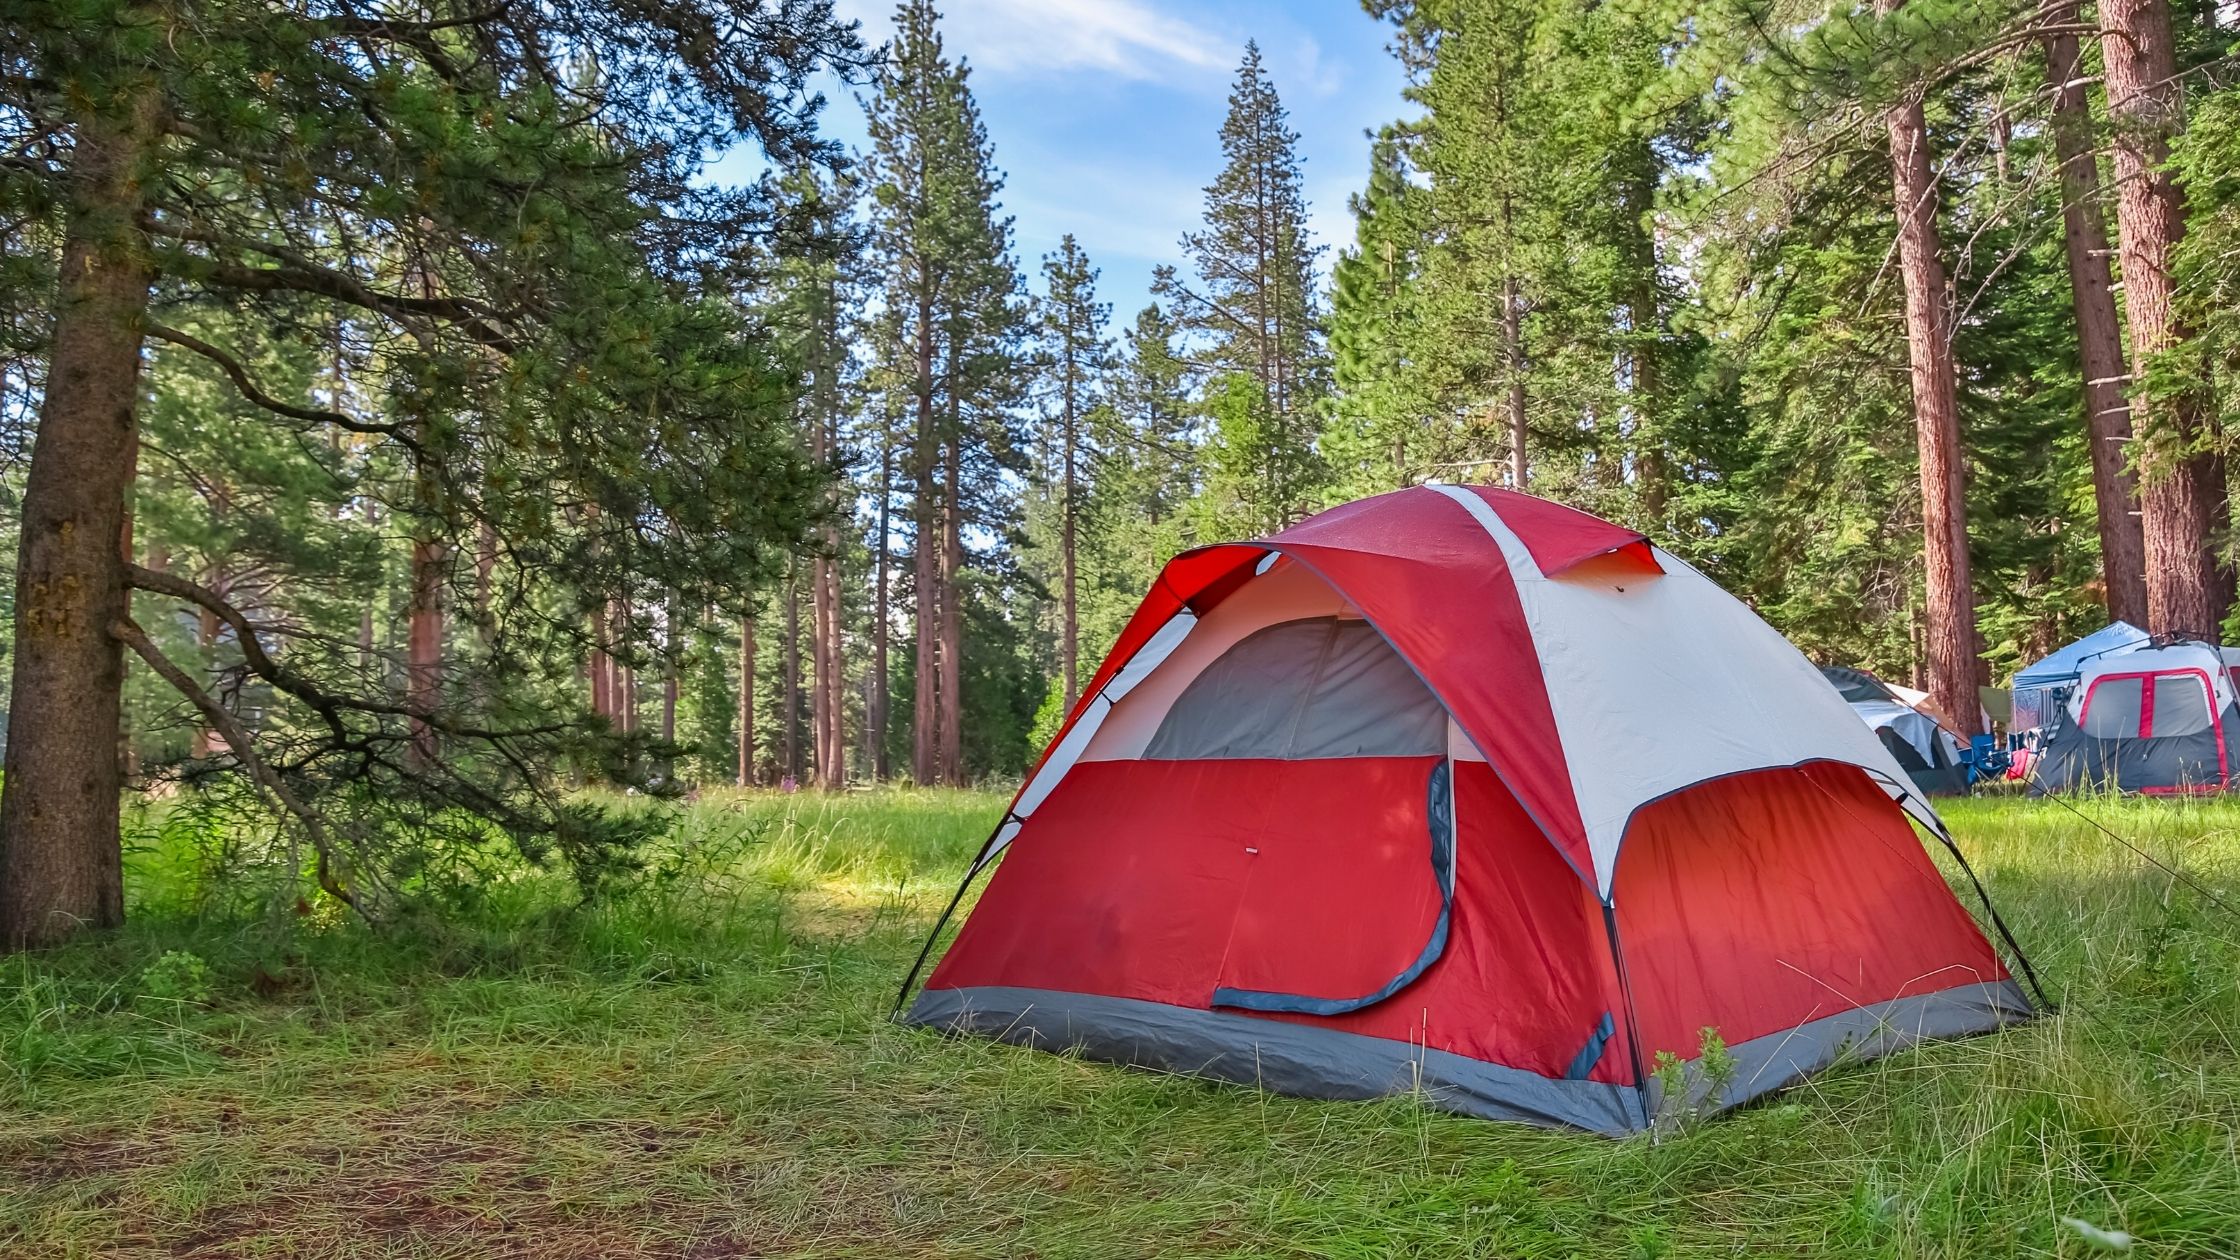 Fun Things to Do When Camping With Family